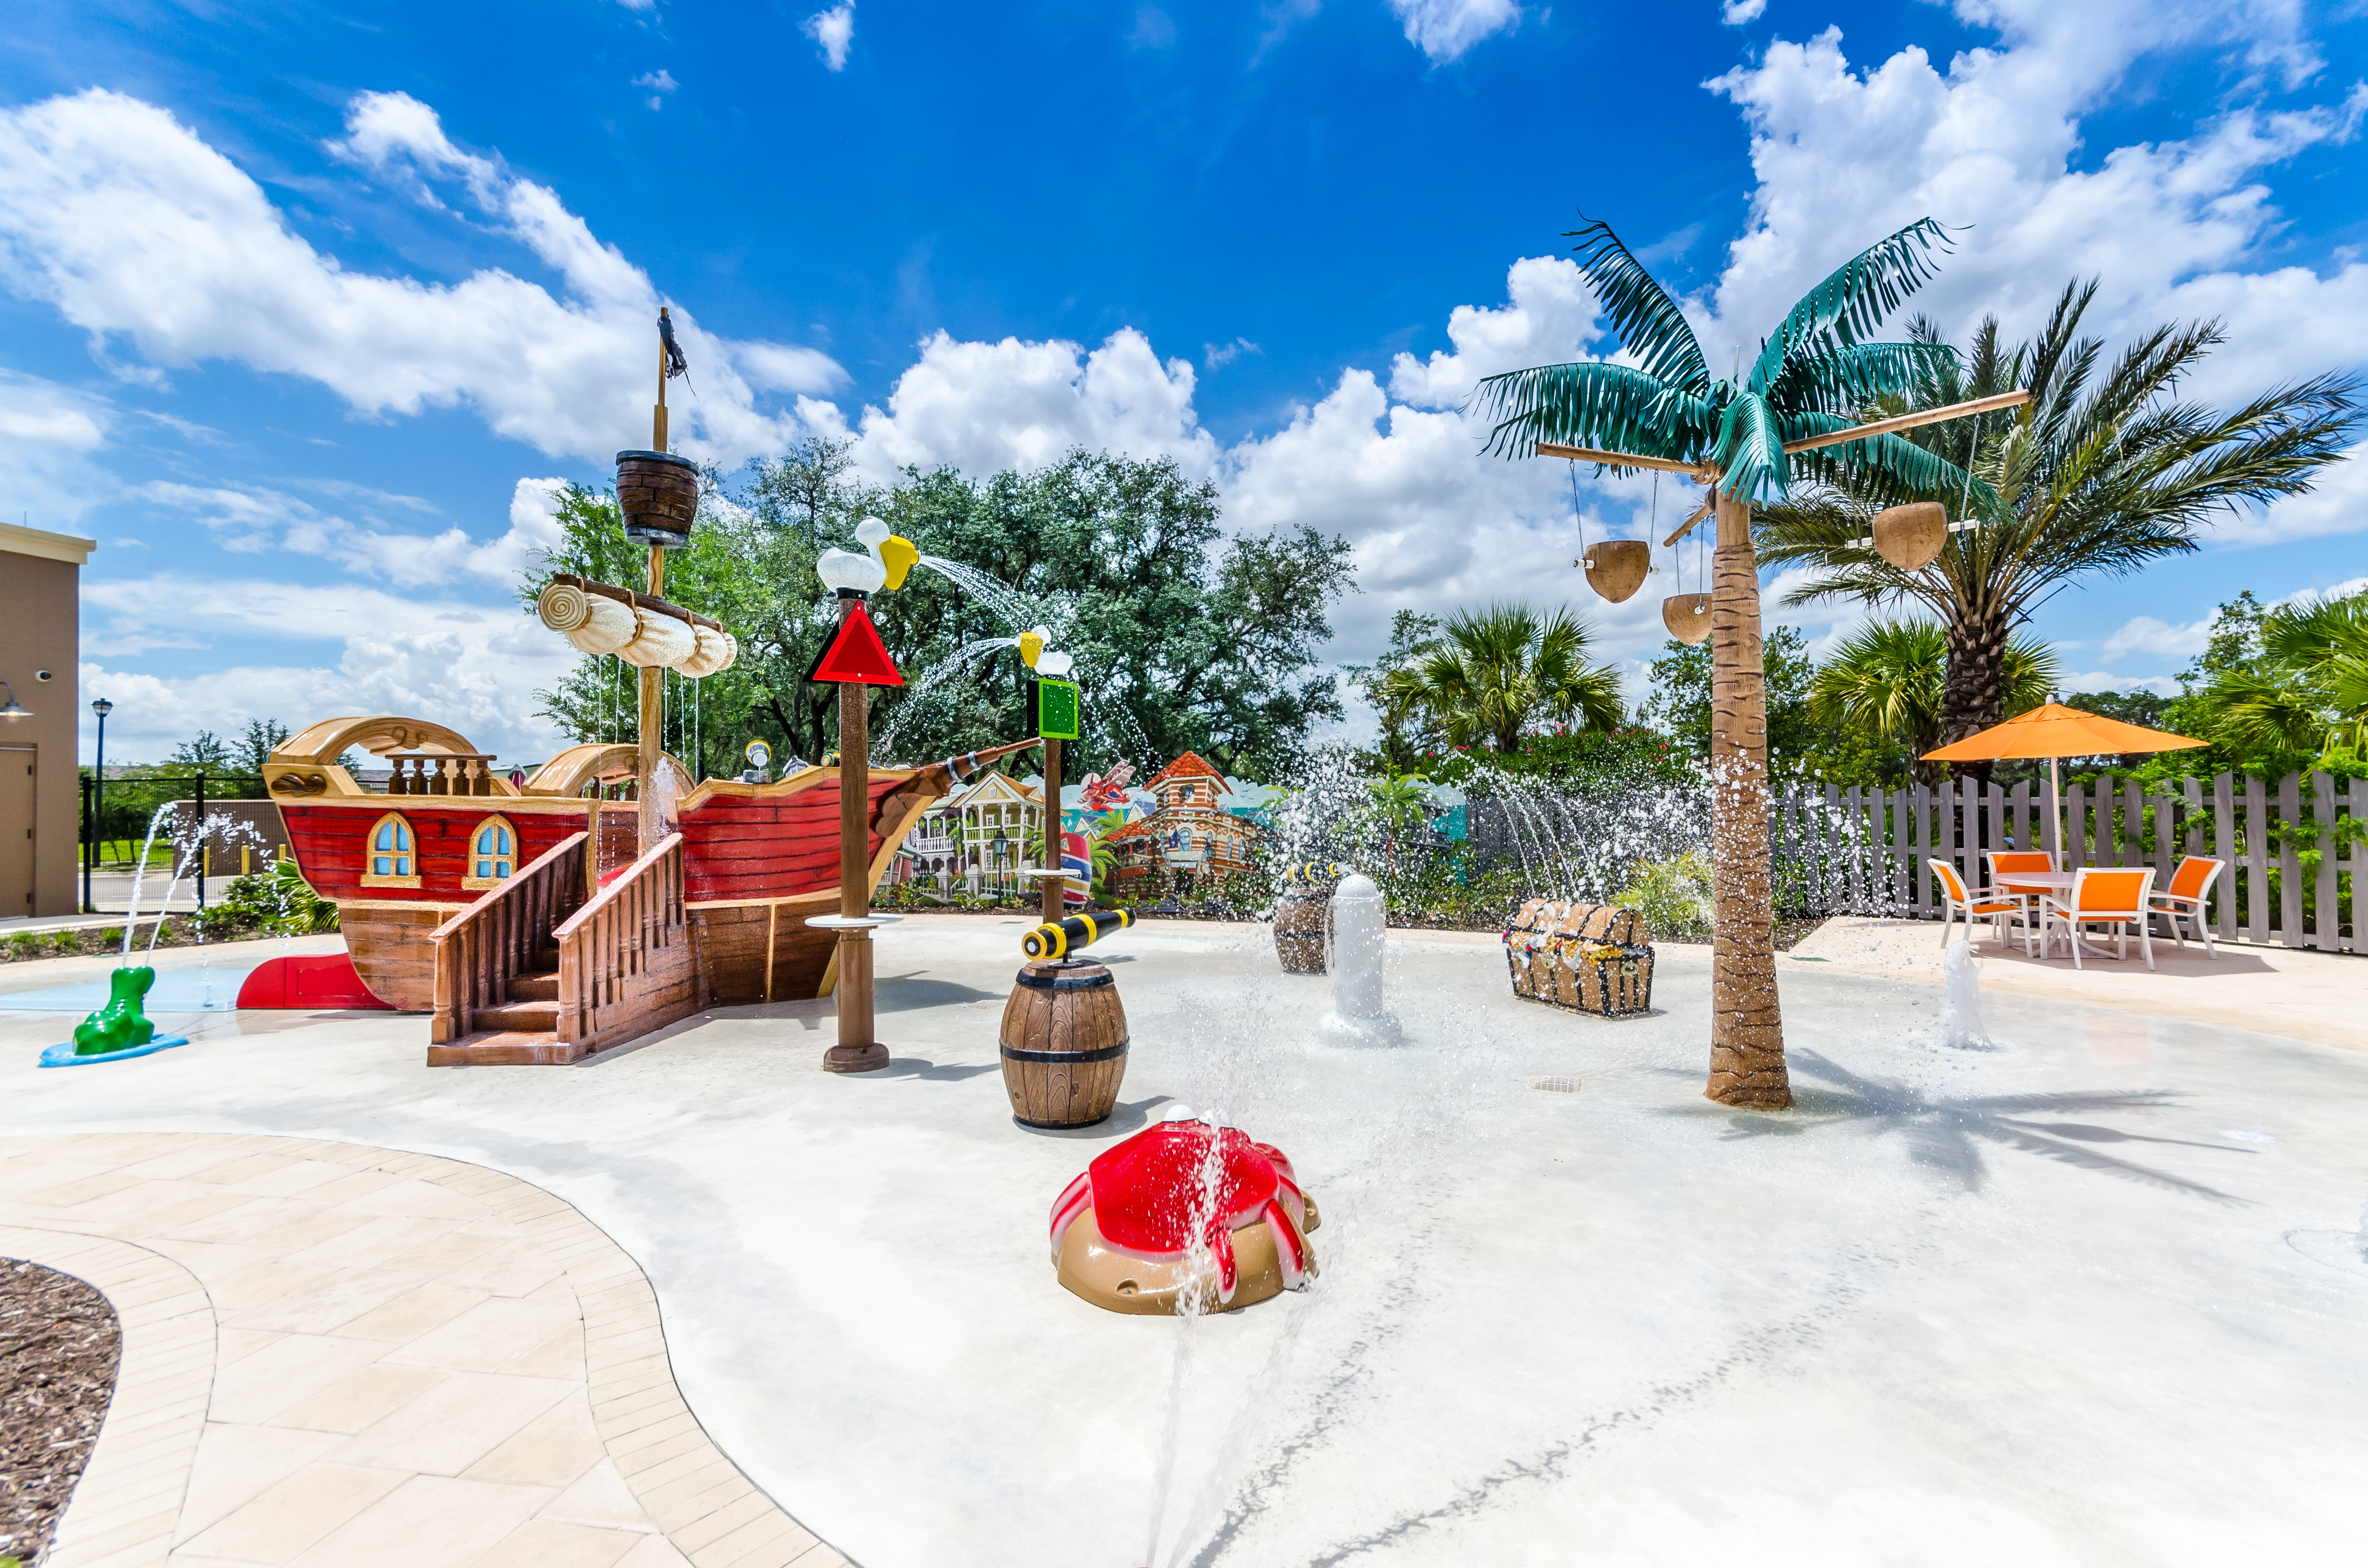 Festival Resort Community Pool in Davenport Florida - Experience paradise at resort pool oasis - Sparkling waters that beckon you to dive in and unwind